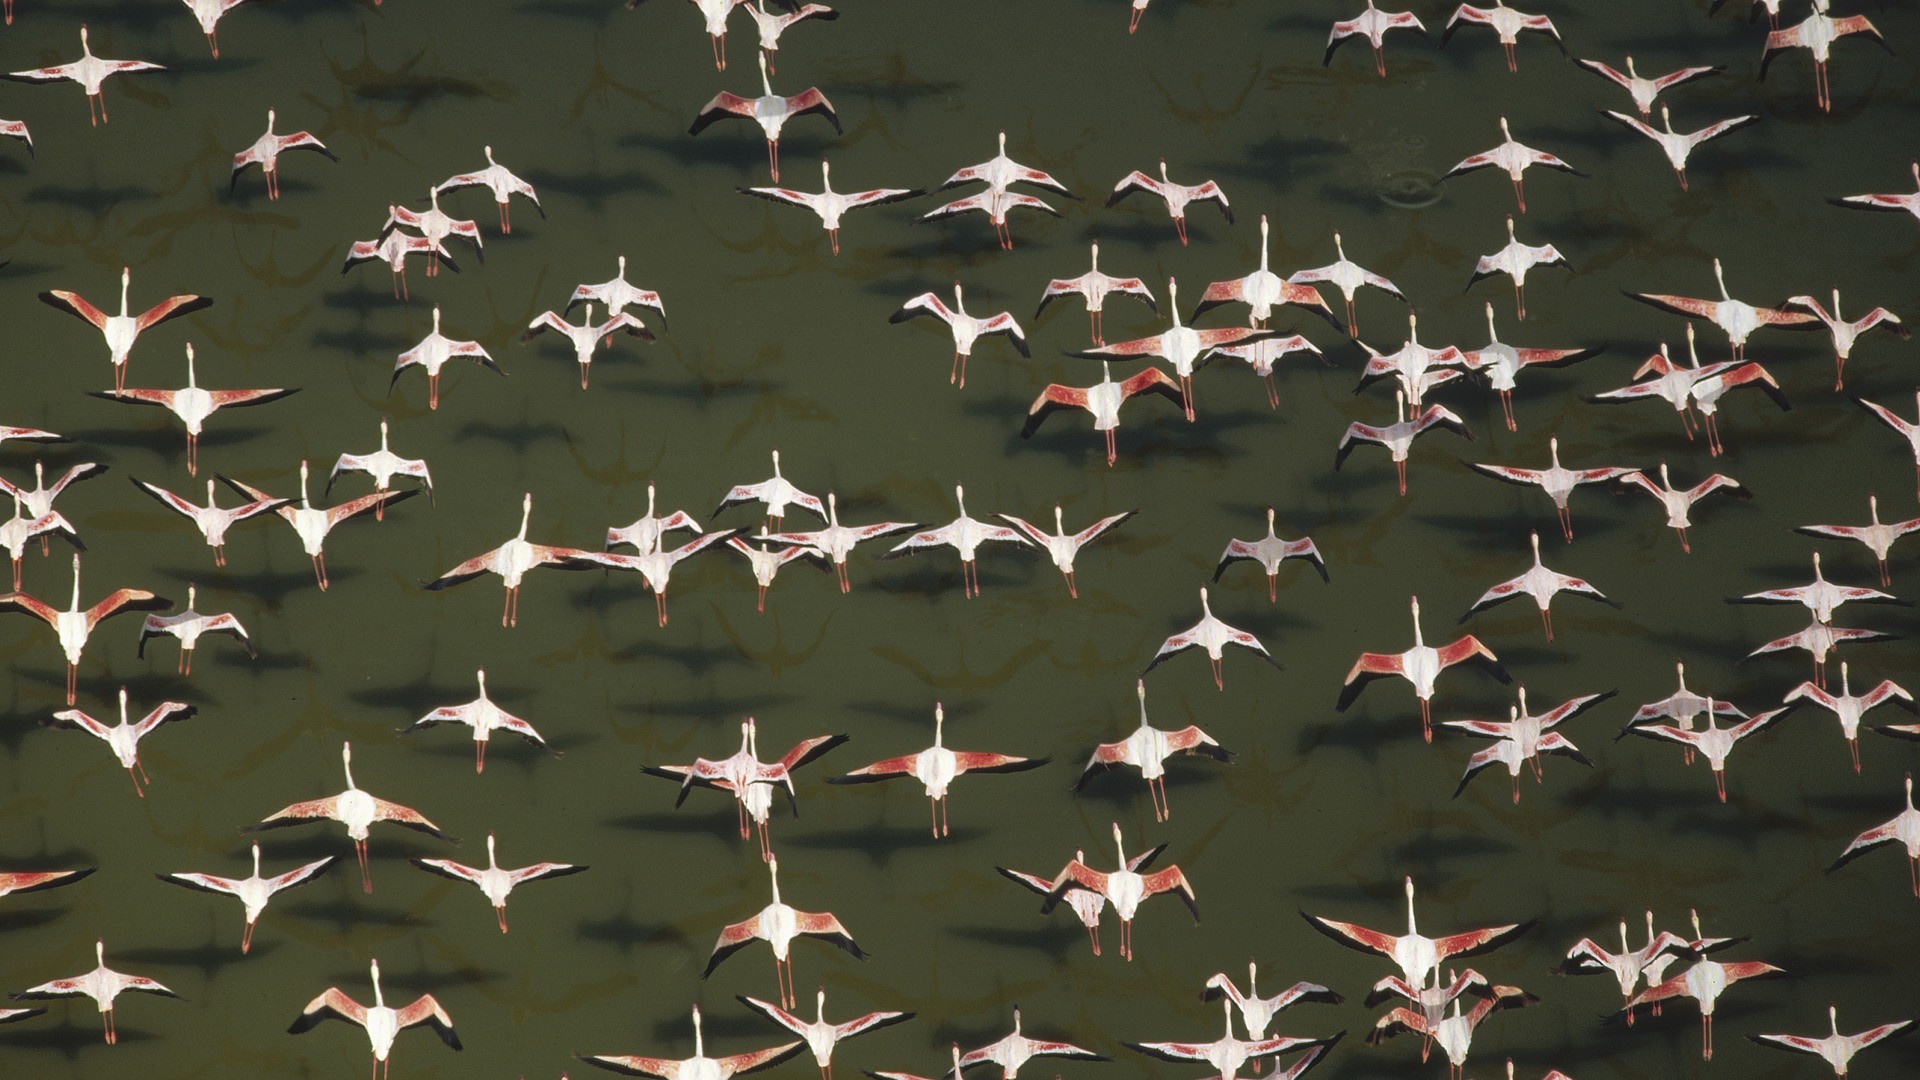 Aerial view of a flock of Lesser Flamingo, Kenya by Scott Ford